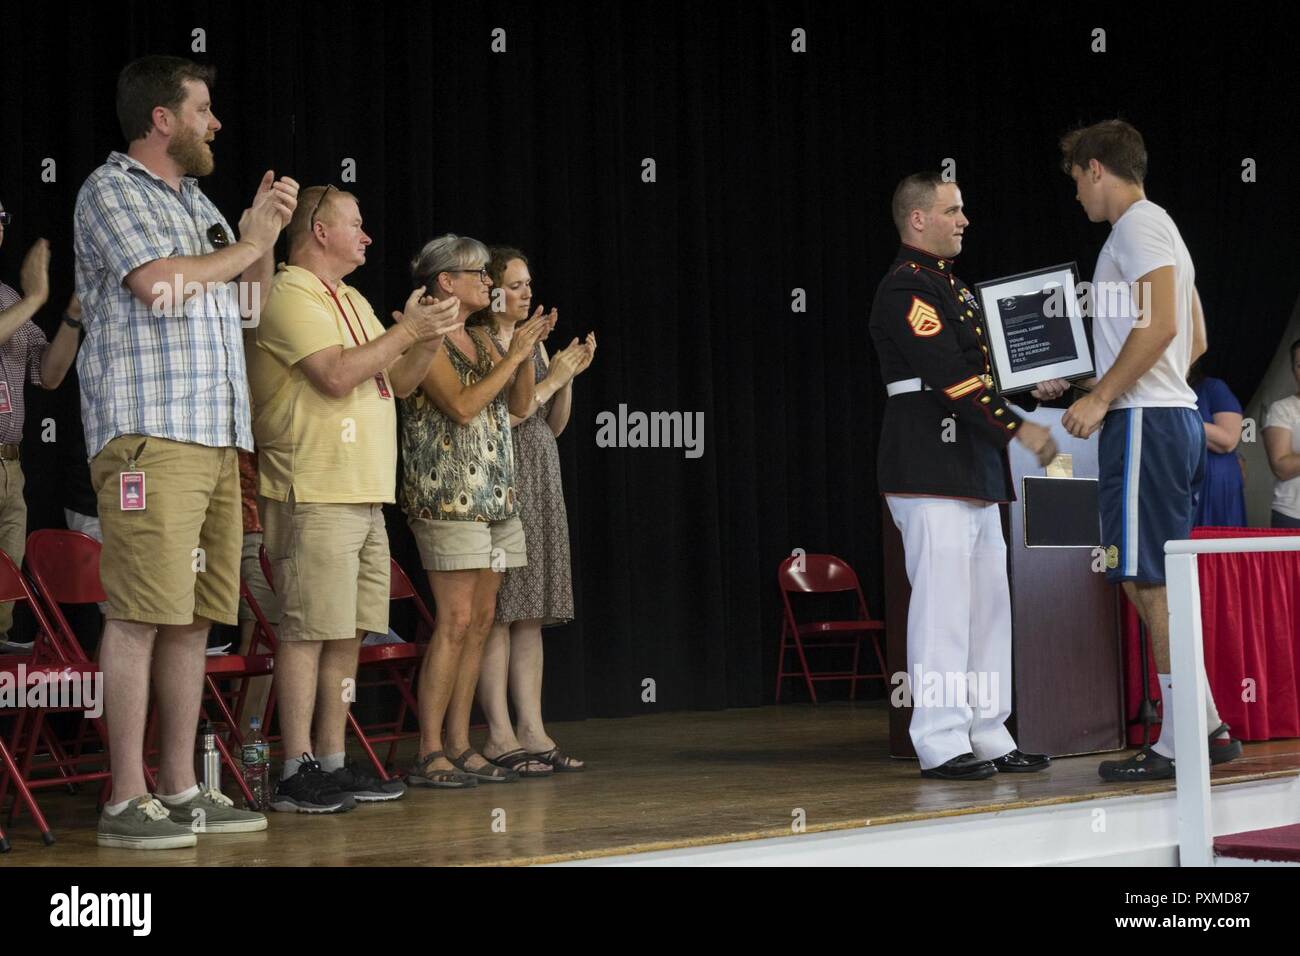 Staff Sgt. James Ralstin presents Michael Lunny, a junior with Sanford High School in Sanford, Maine, with a plaque commemorating his Semper Fidelis All-American Program selection during an award ceremony at the school, June 13, 2017. Lunny will be one of less than 100 nominees attending the Battles Won Academy, a Marine Corps leadership and networking seminar in Washington, D.C. Ralstin is a canvassing recruiter for Recruiting Substation Dover, N.H. Stock Photo